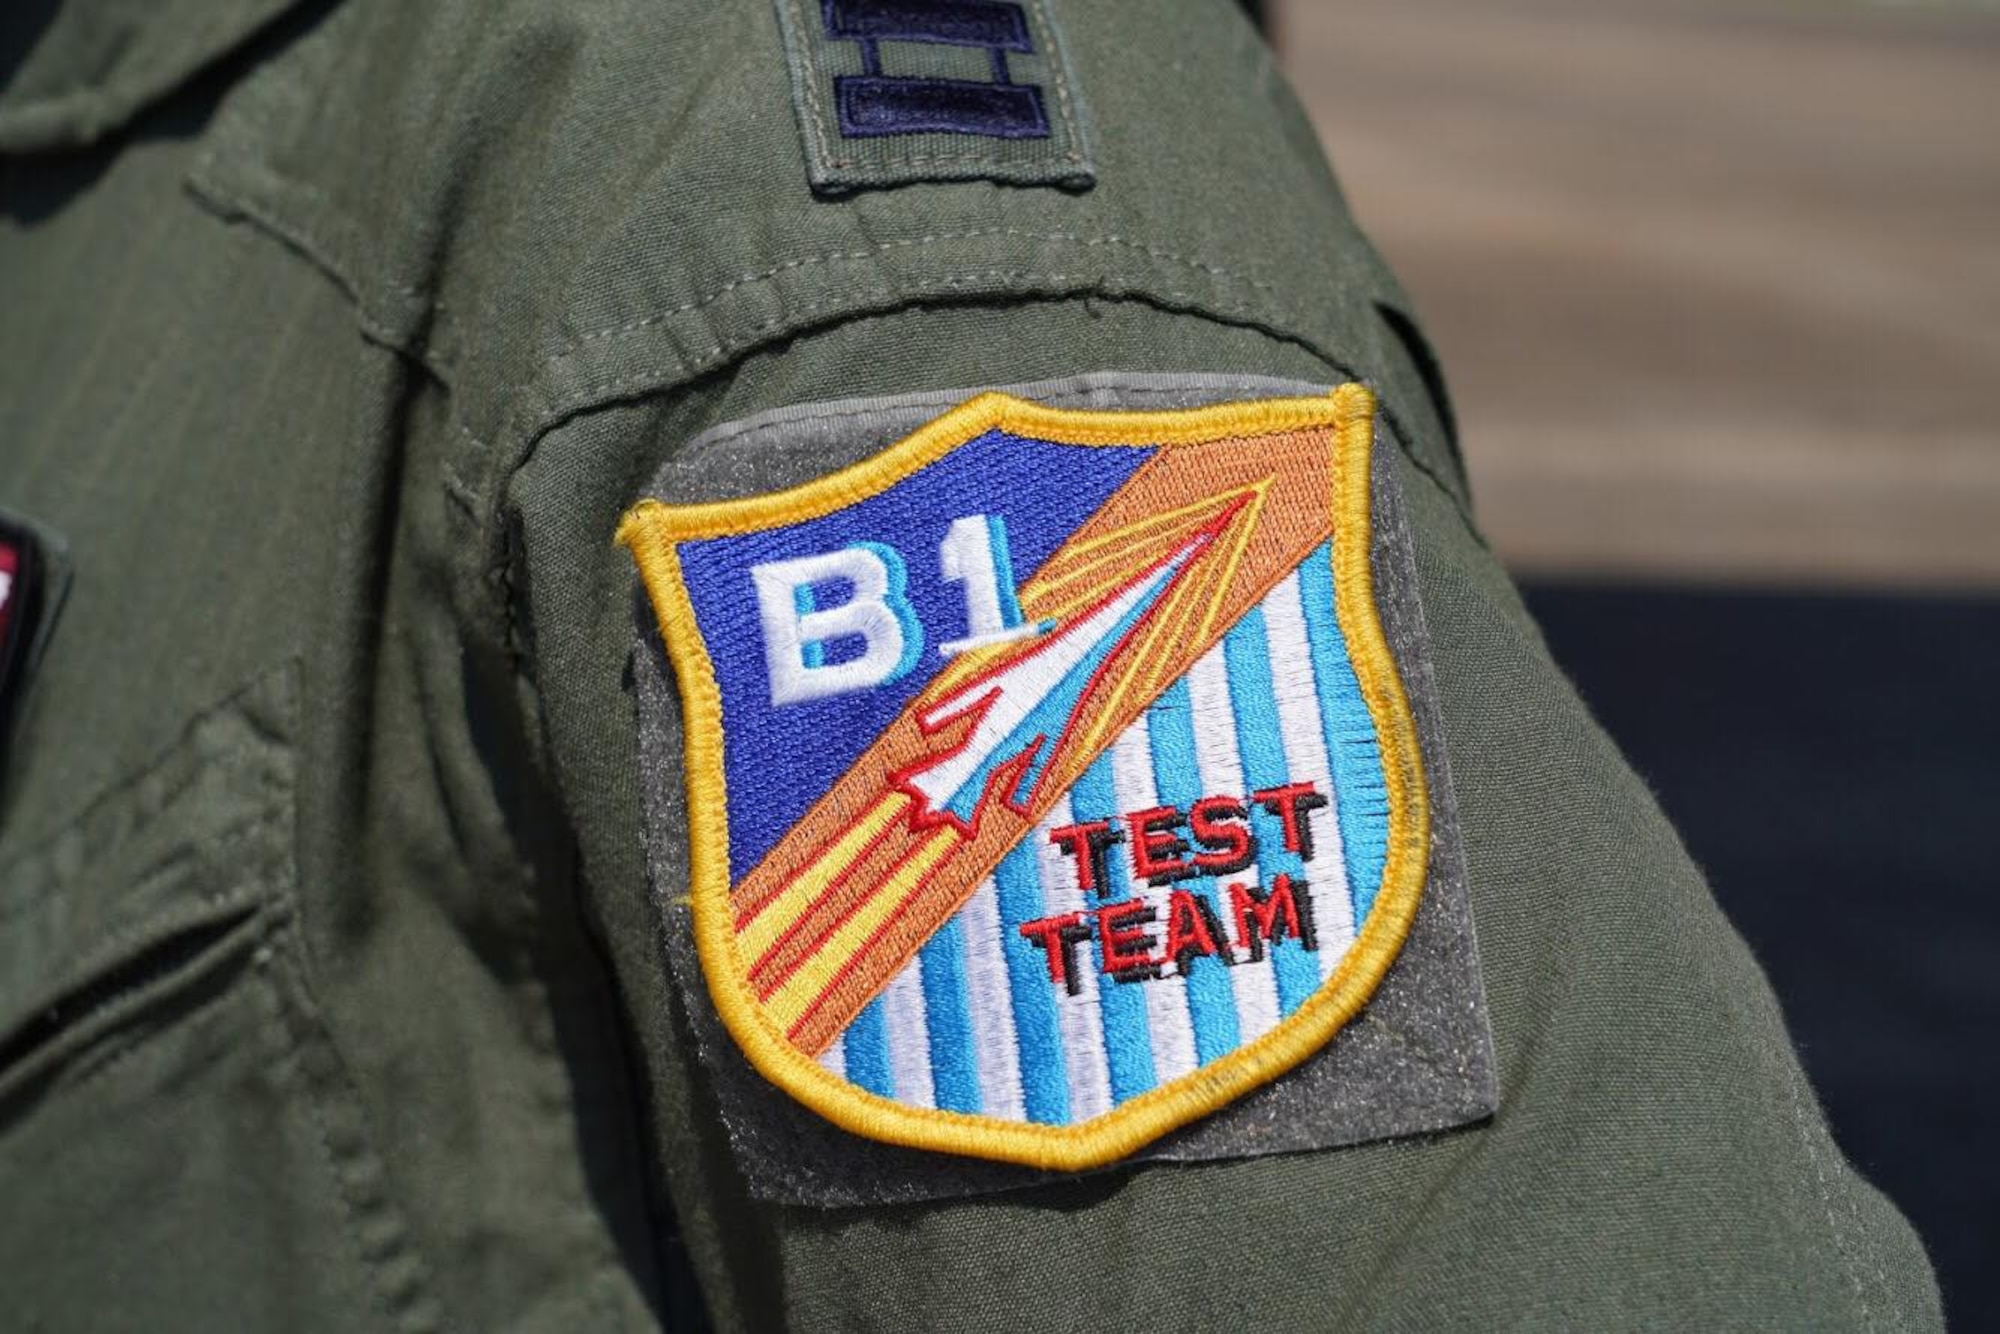 A pilot wears the B-1 “Test Team” patch of the 337th Test and Evaluation Squadron located at Dyess AFB, Texas during a tour on July 30, 2016 at Eglin Air Force Base, Fla. Aircrew brought the 53rd Wing bomber to allow wing personnel an opportunity to see one of their geographically separated aircraft up close. (U.S. Army photo/SGT Sean Hall)